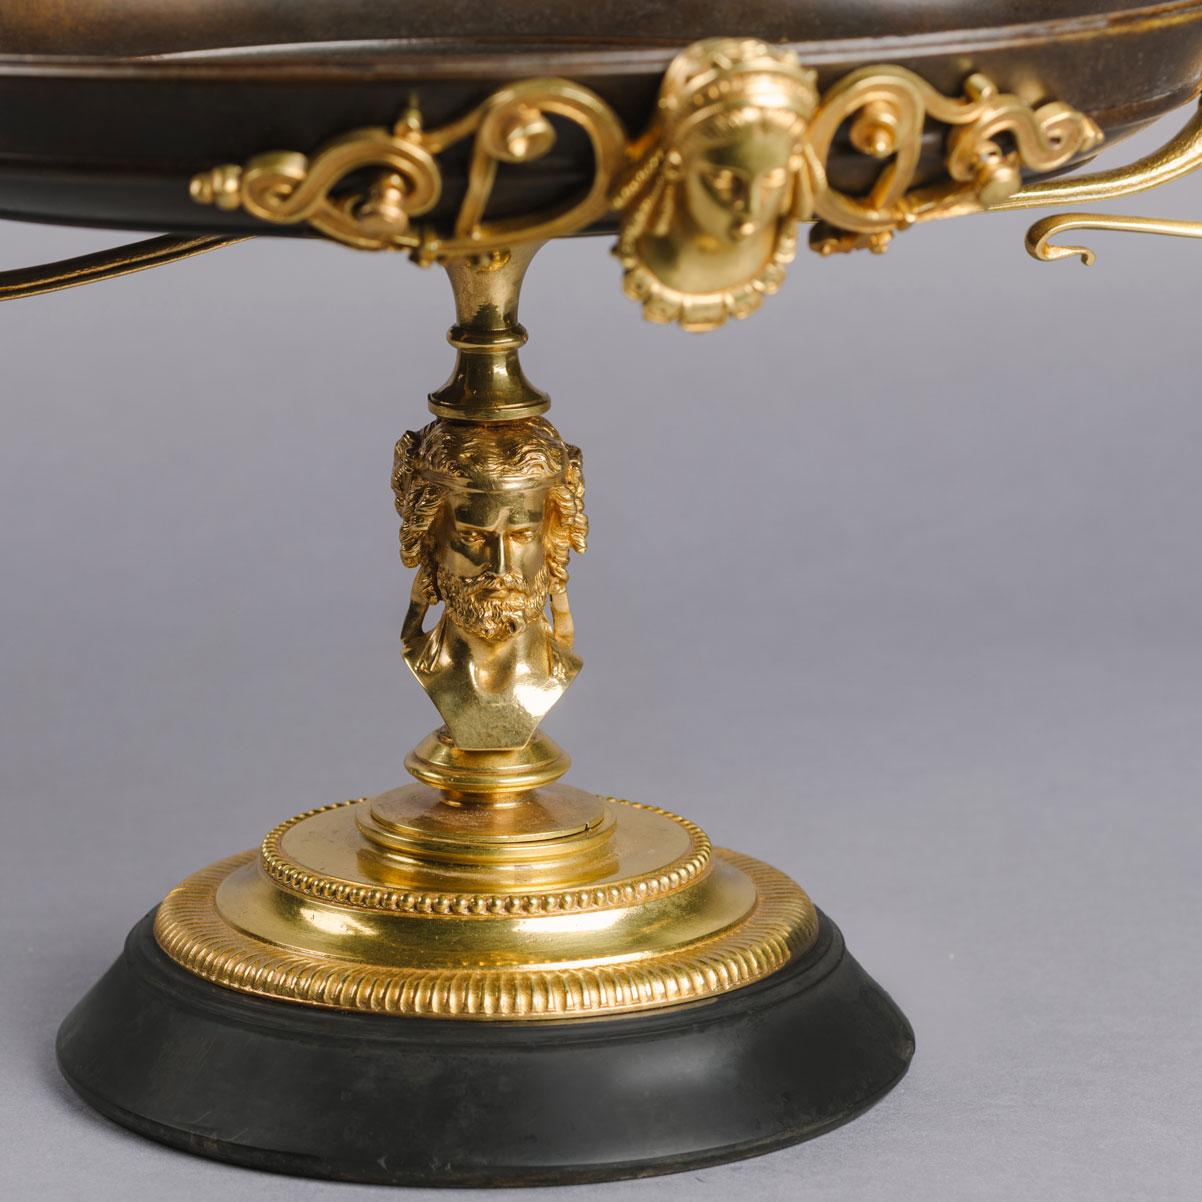 19th Century Fine Neoclassical Revival Gilt and Patinated Bronze Tazza For Sale